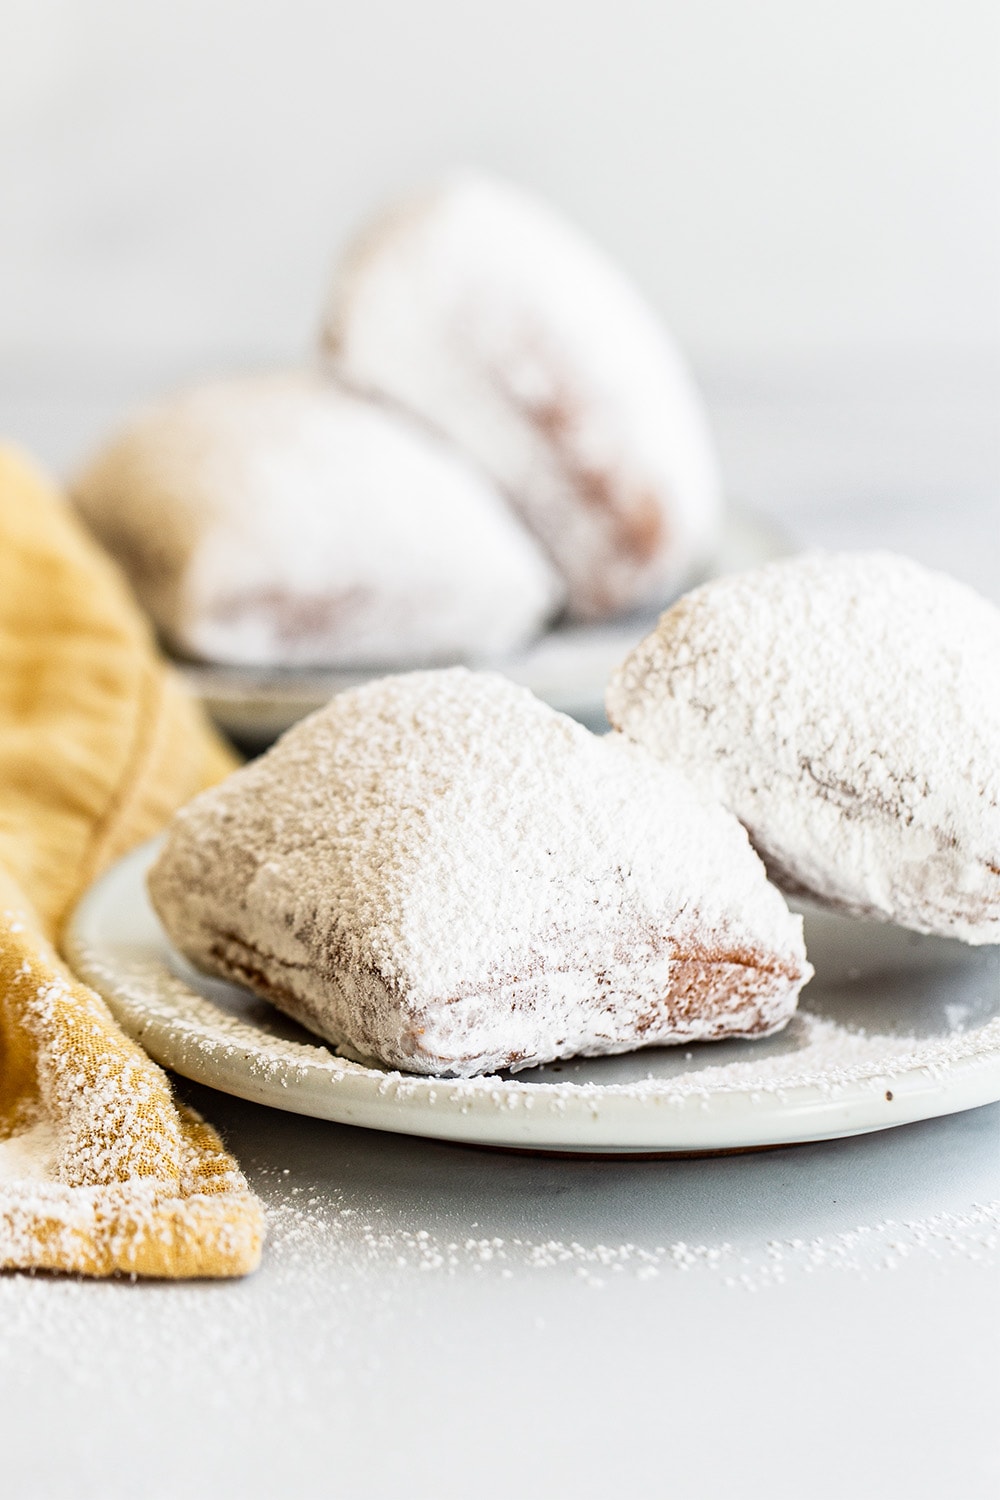 Beignets on a plate